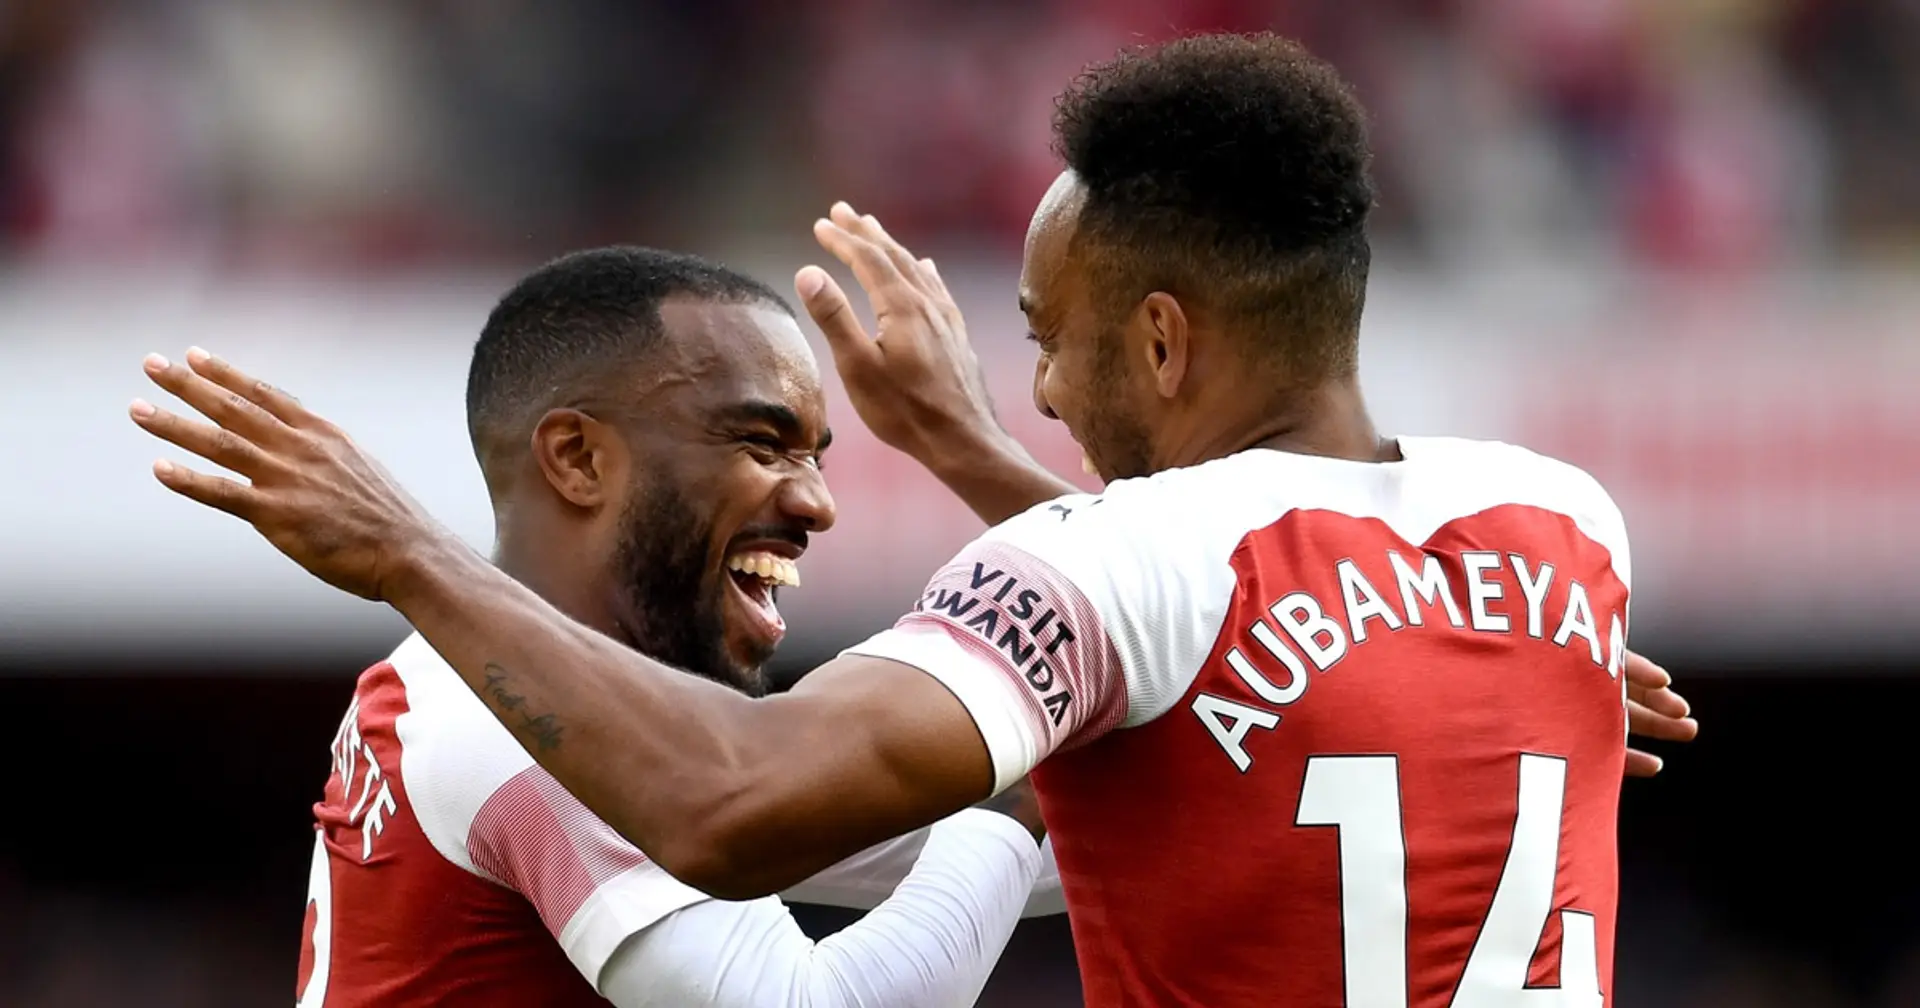 Lacazette reacts to Aubameyang contract rumours